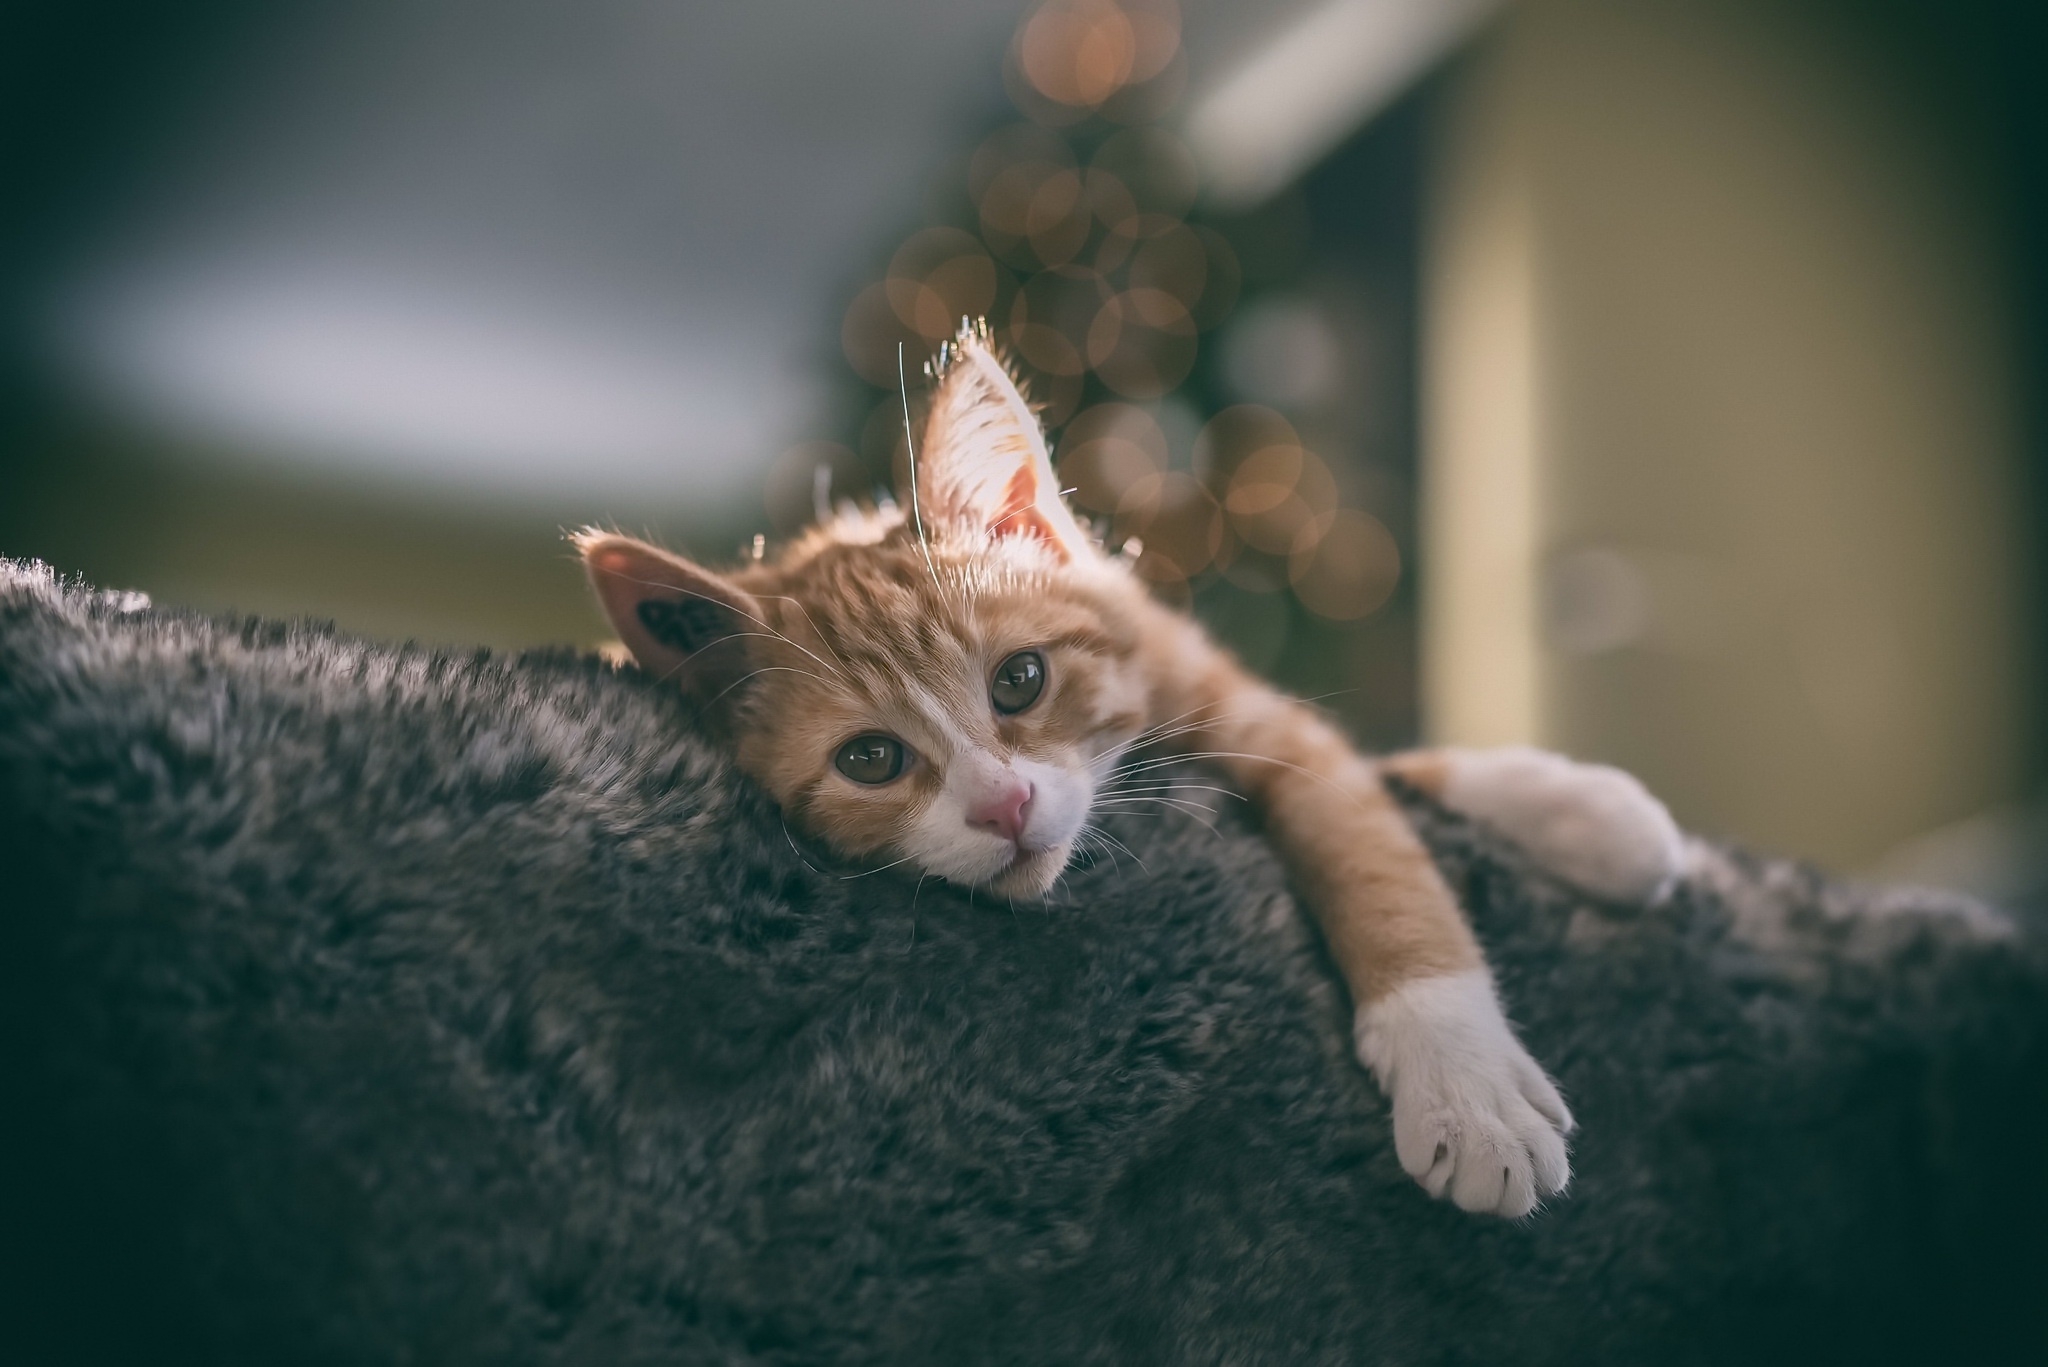 Lazy ginger cat rests and looks at the photographer